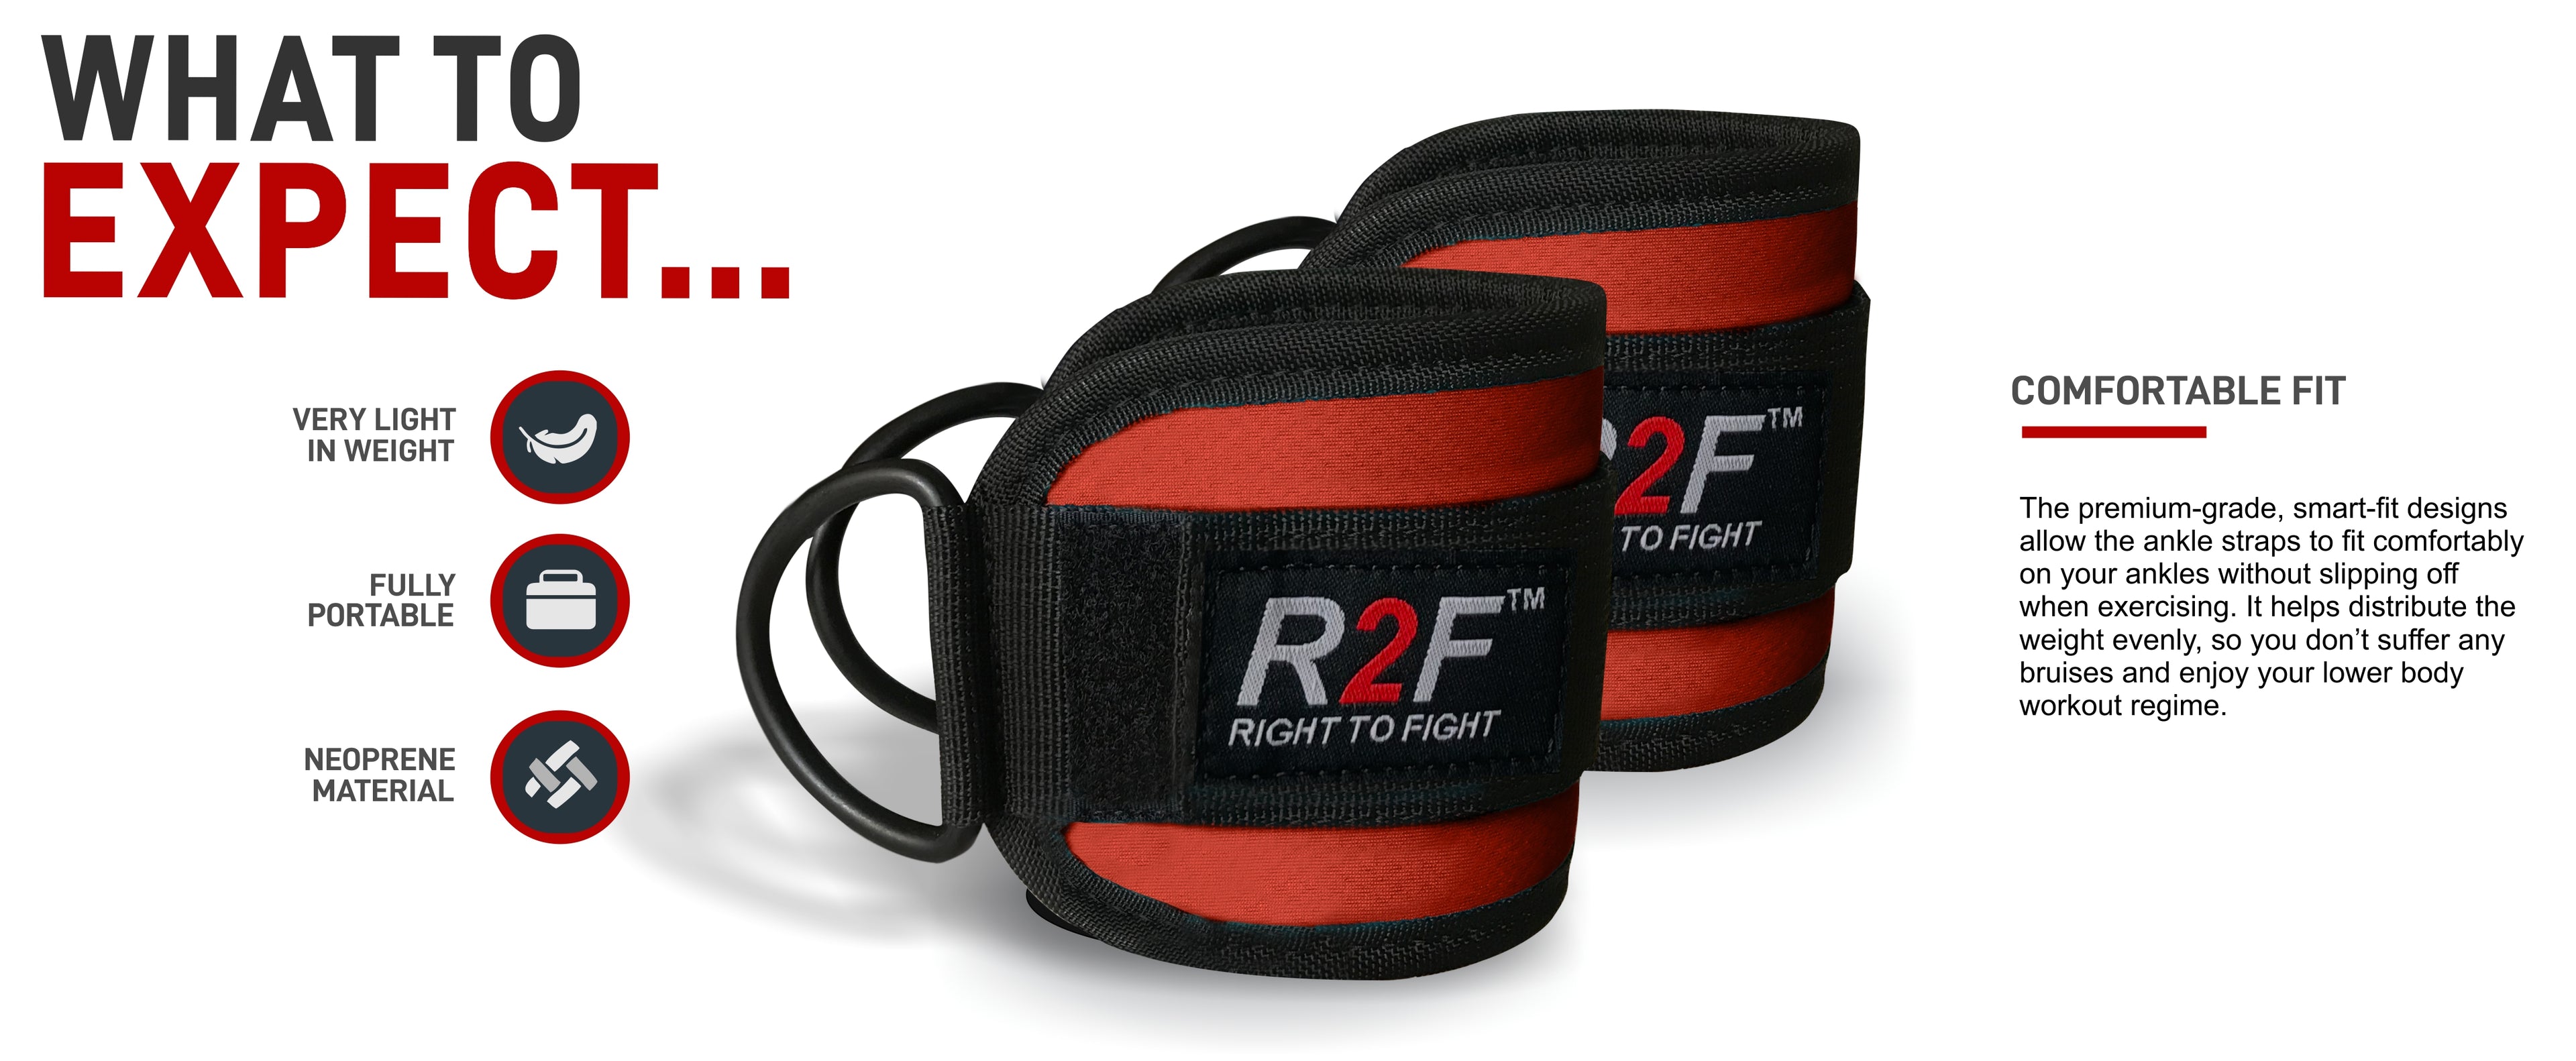 R2F Ankle Straps for Cable Machine Attachments - Pack of 2 Fitness Straps Gym Exercise for Men and Women